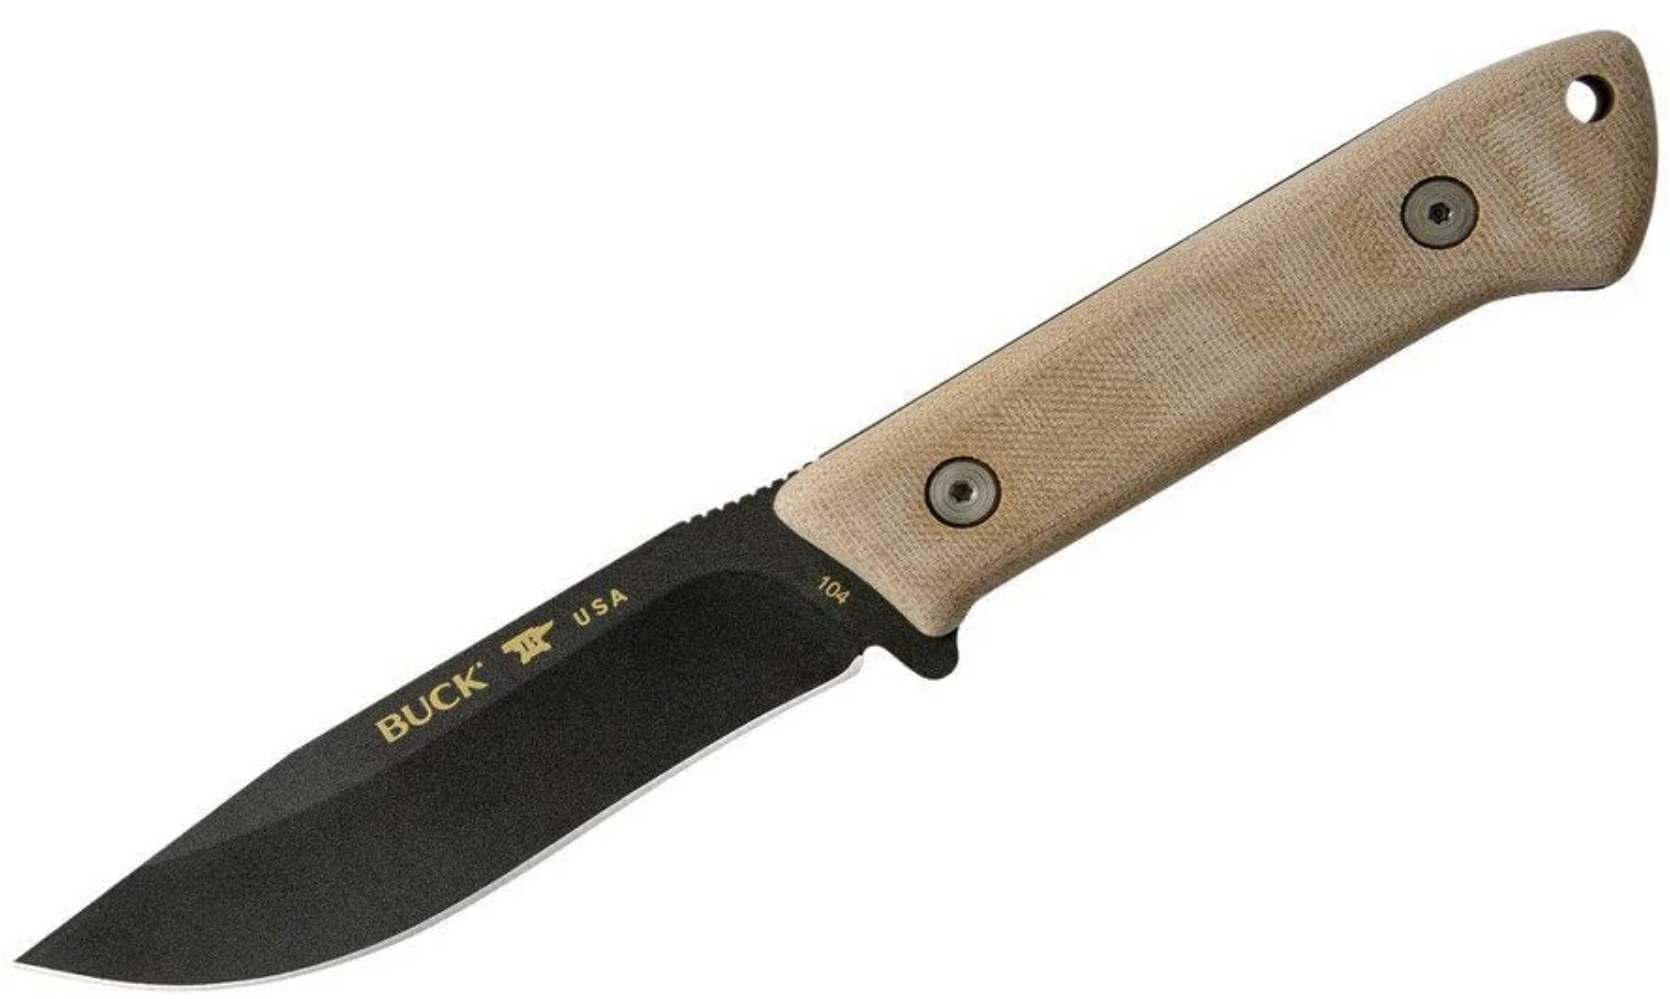 The Buck Compadre knife with a wooden handle